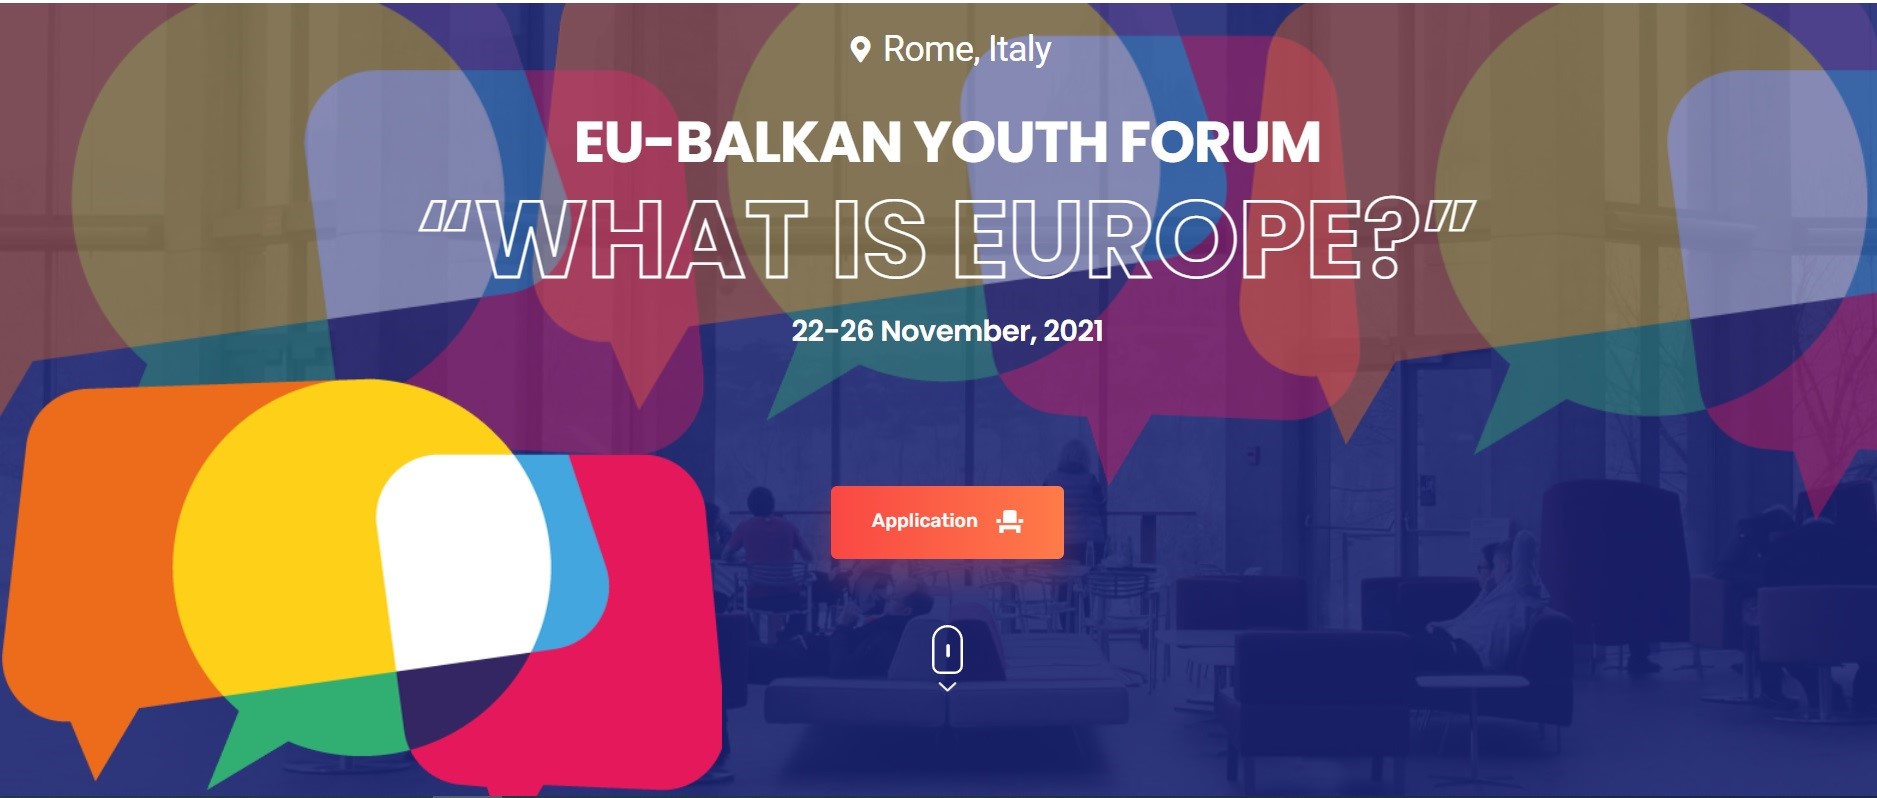 The Italian Ministry of Foreign Affairs and International Cooperation, in partnership with the Regional Cooperation Council (RCC) to host the EU-Balkan Youth Forum on 22-26 November 2021 in Rome 